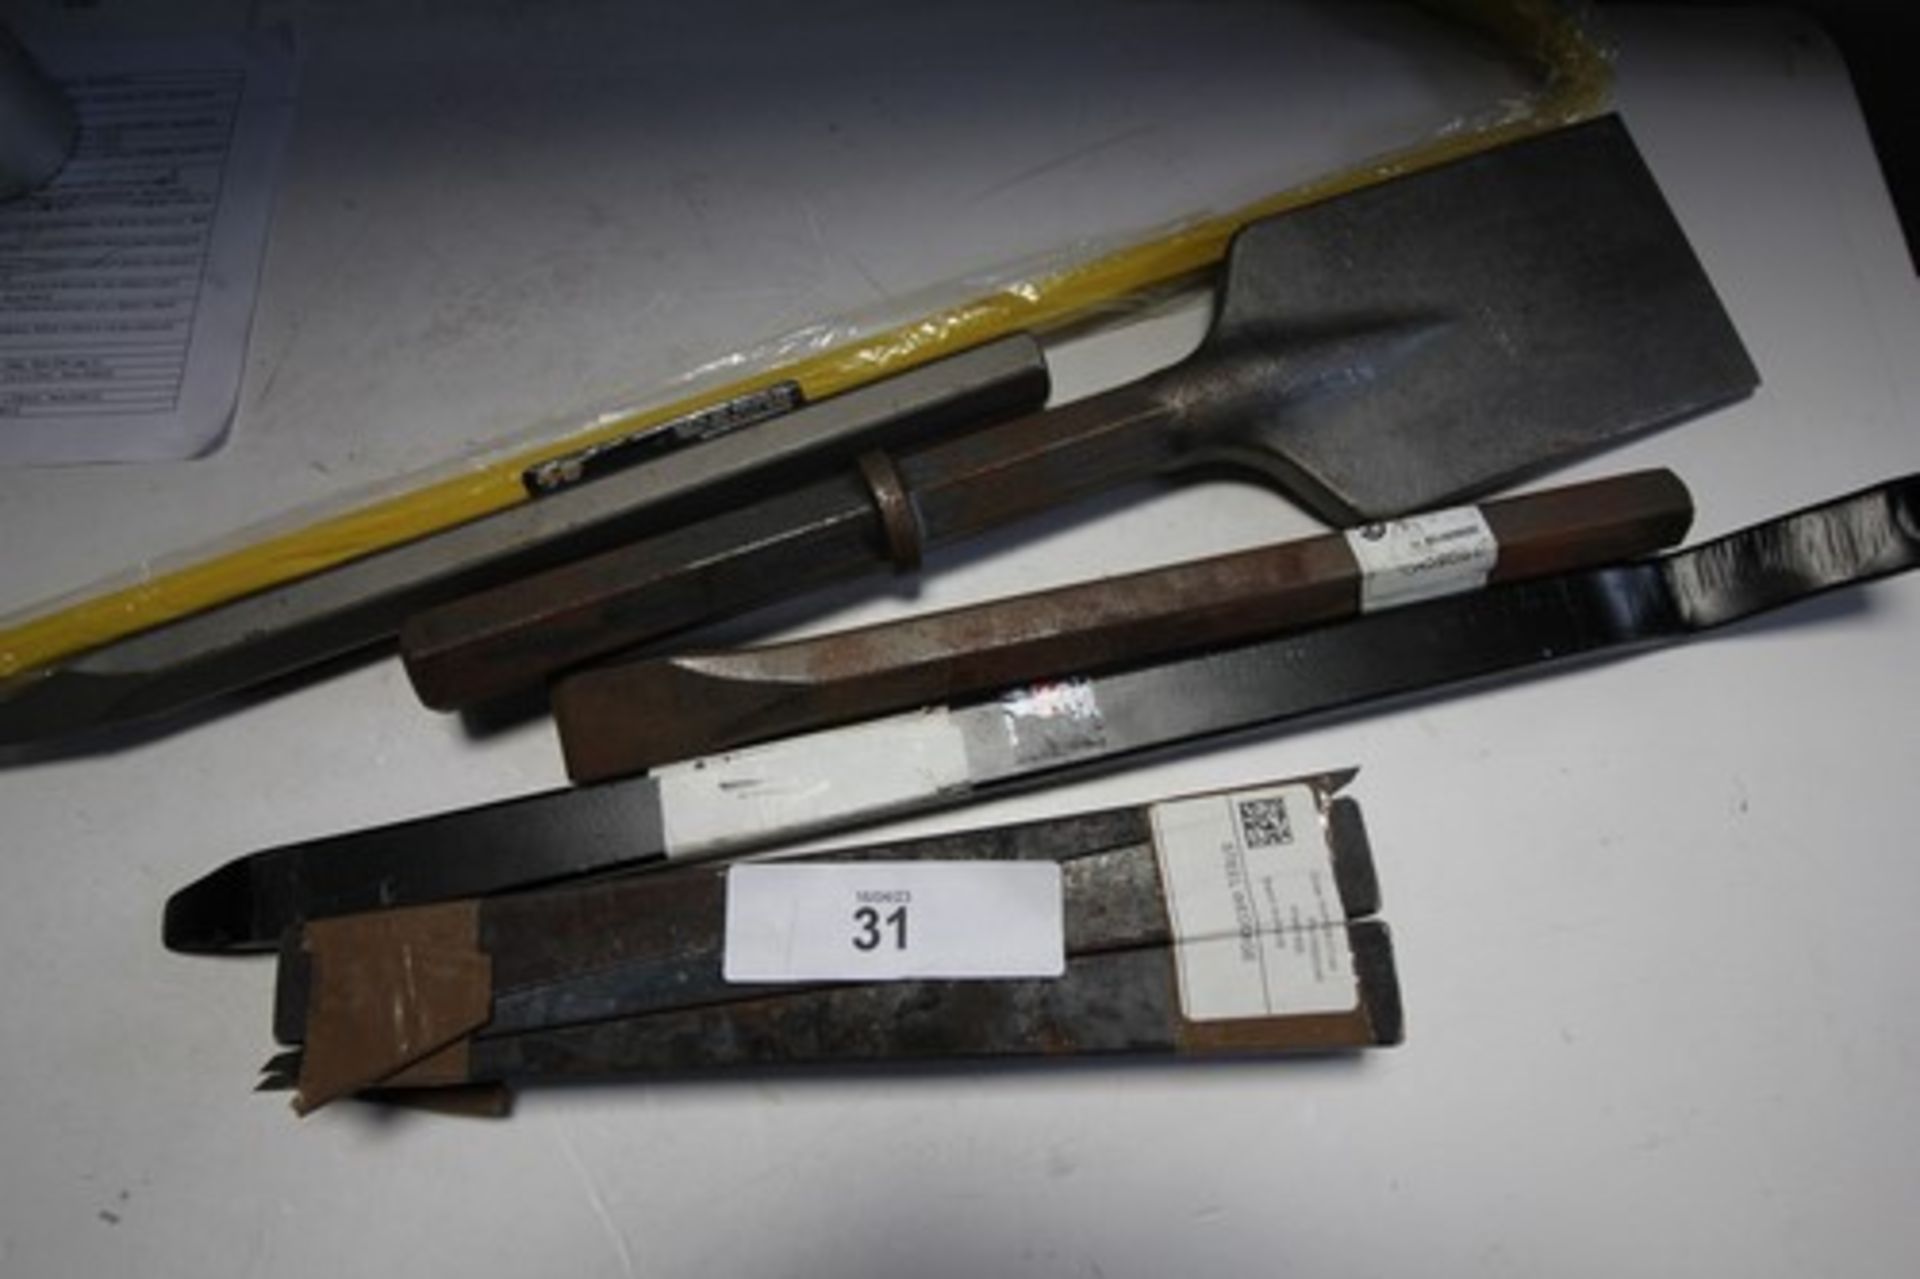 A selection of chisels and points including 3 x large steel wedges, code 137800, 1 x 36mm X 400mm